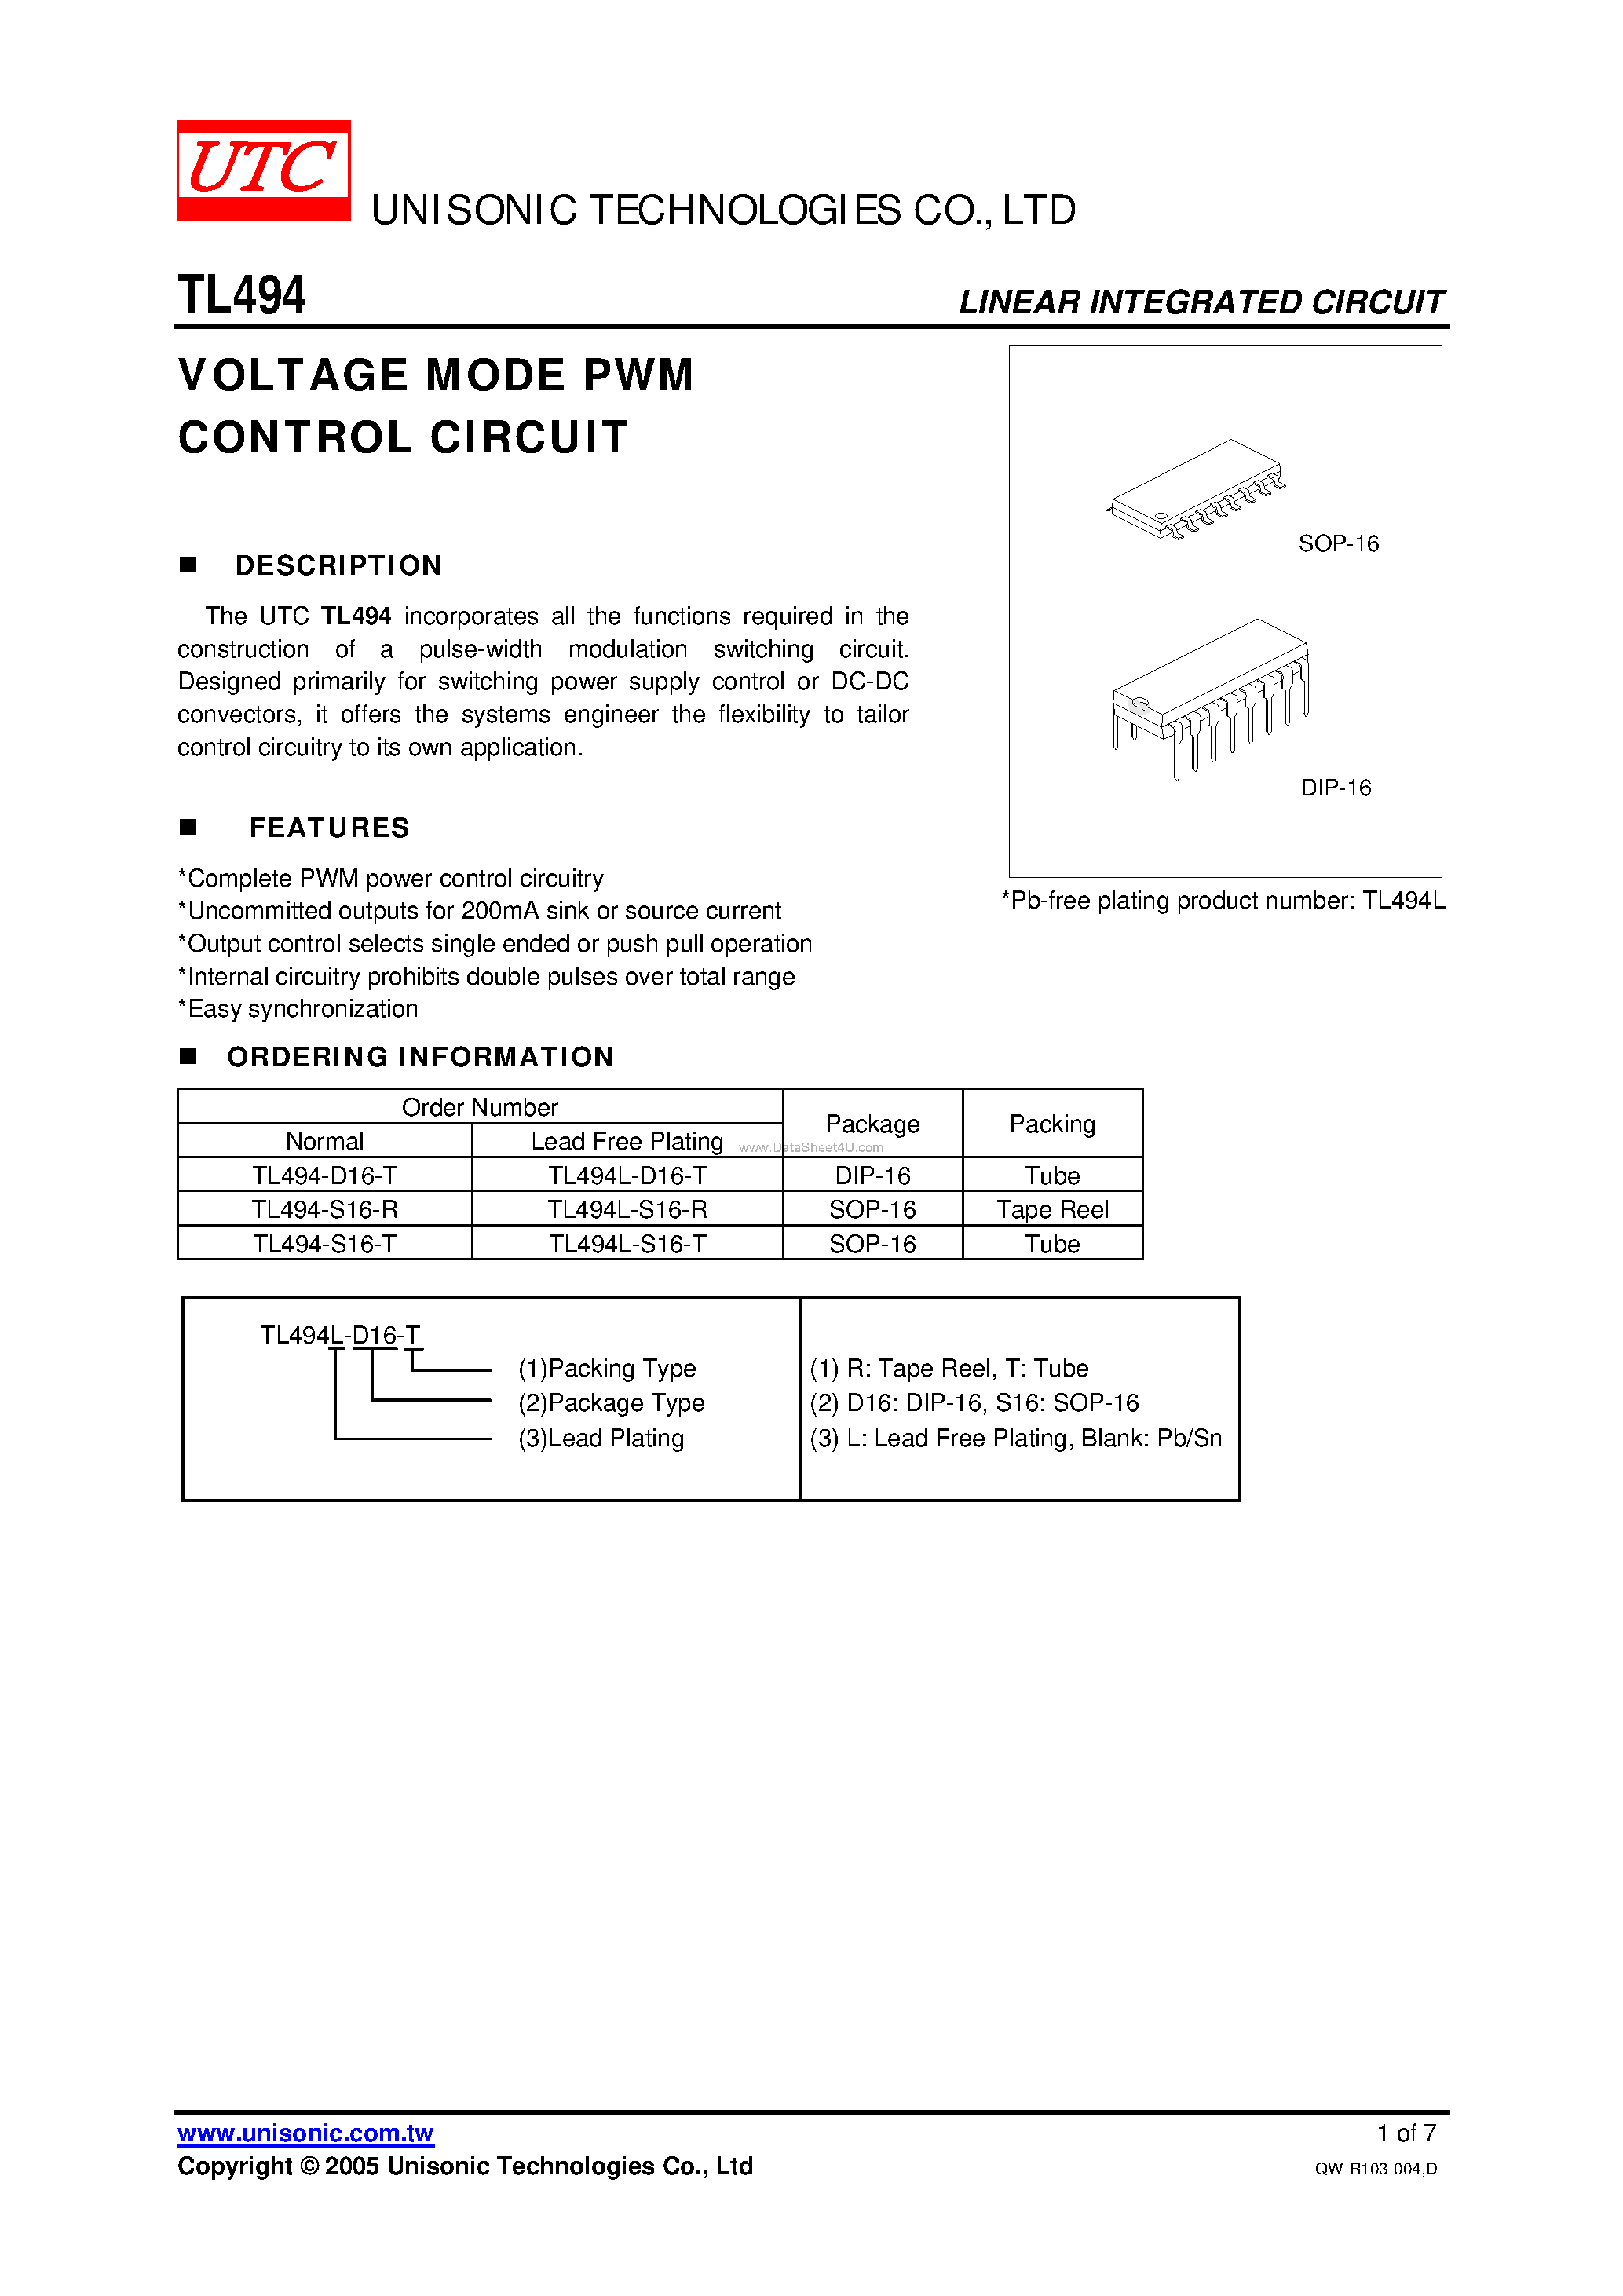 Datasheet TL494 - VOLTAGE MODE PWM CONTROL CIRCUIT page 1